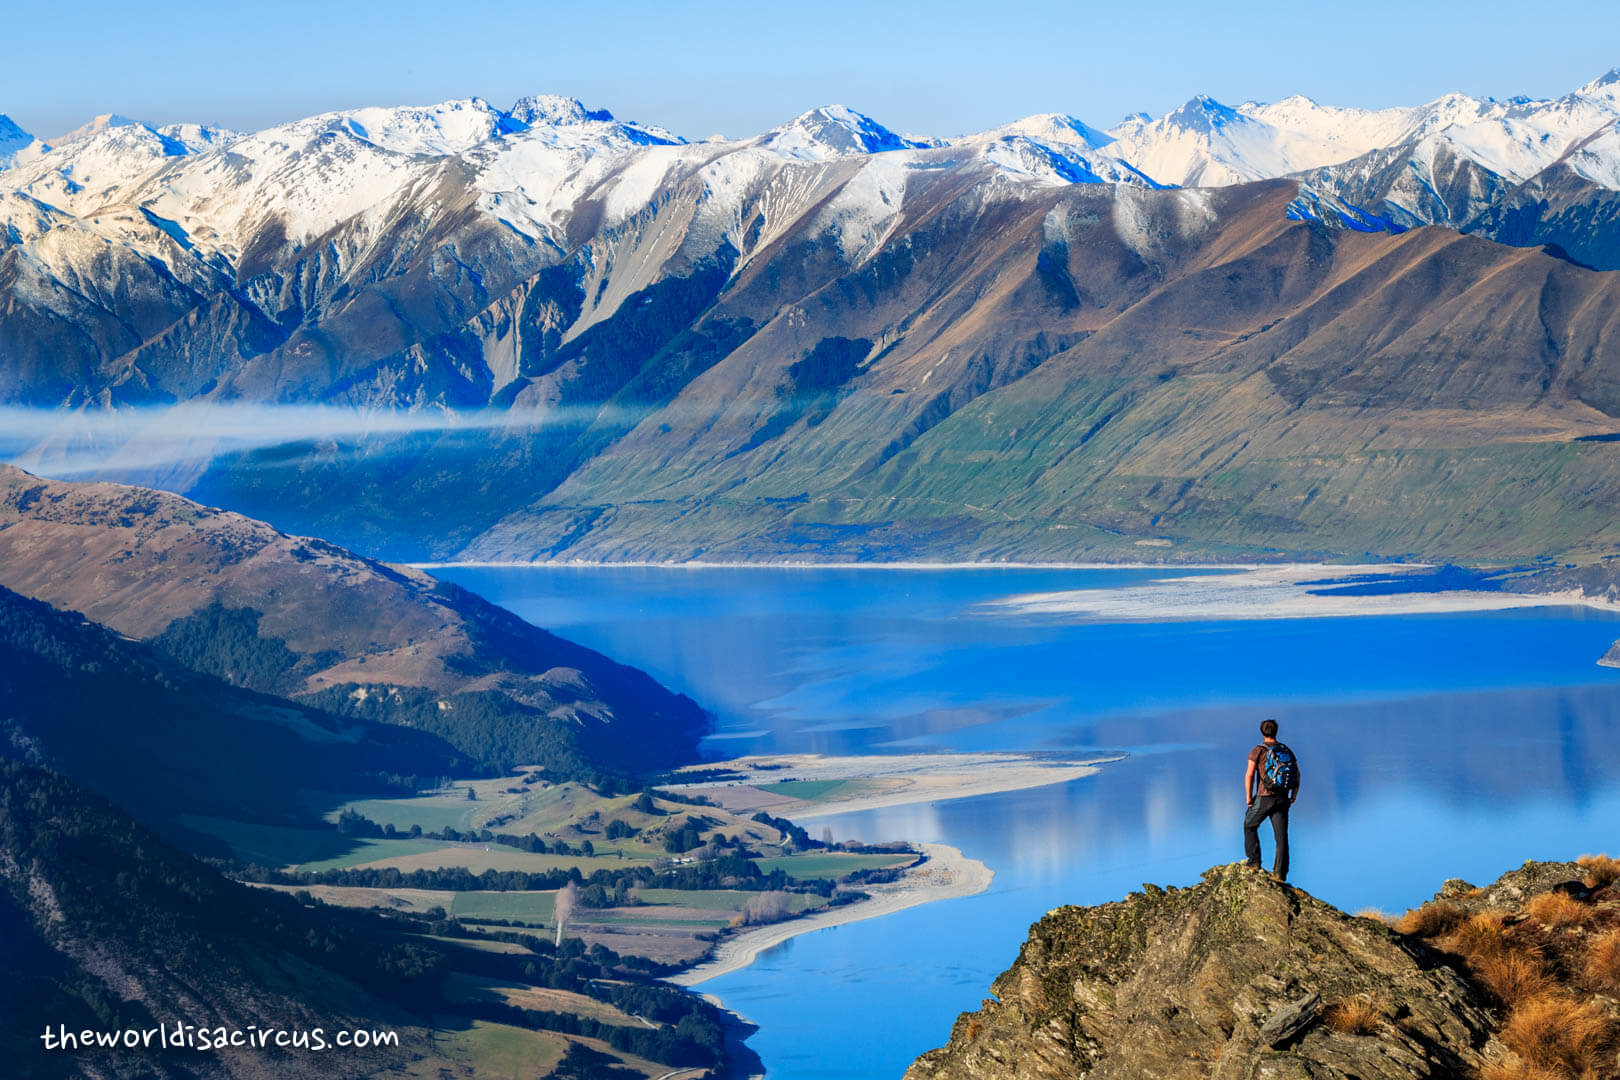 New Zealand in spring, with great views from Isthmus Peak in Wanaka, New Zealand